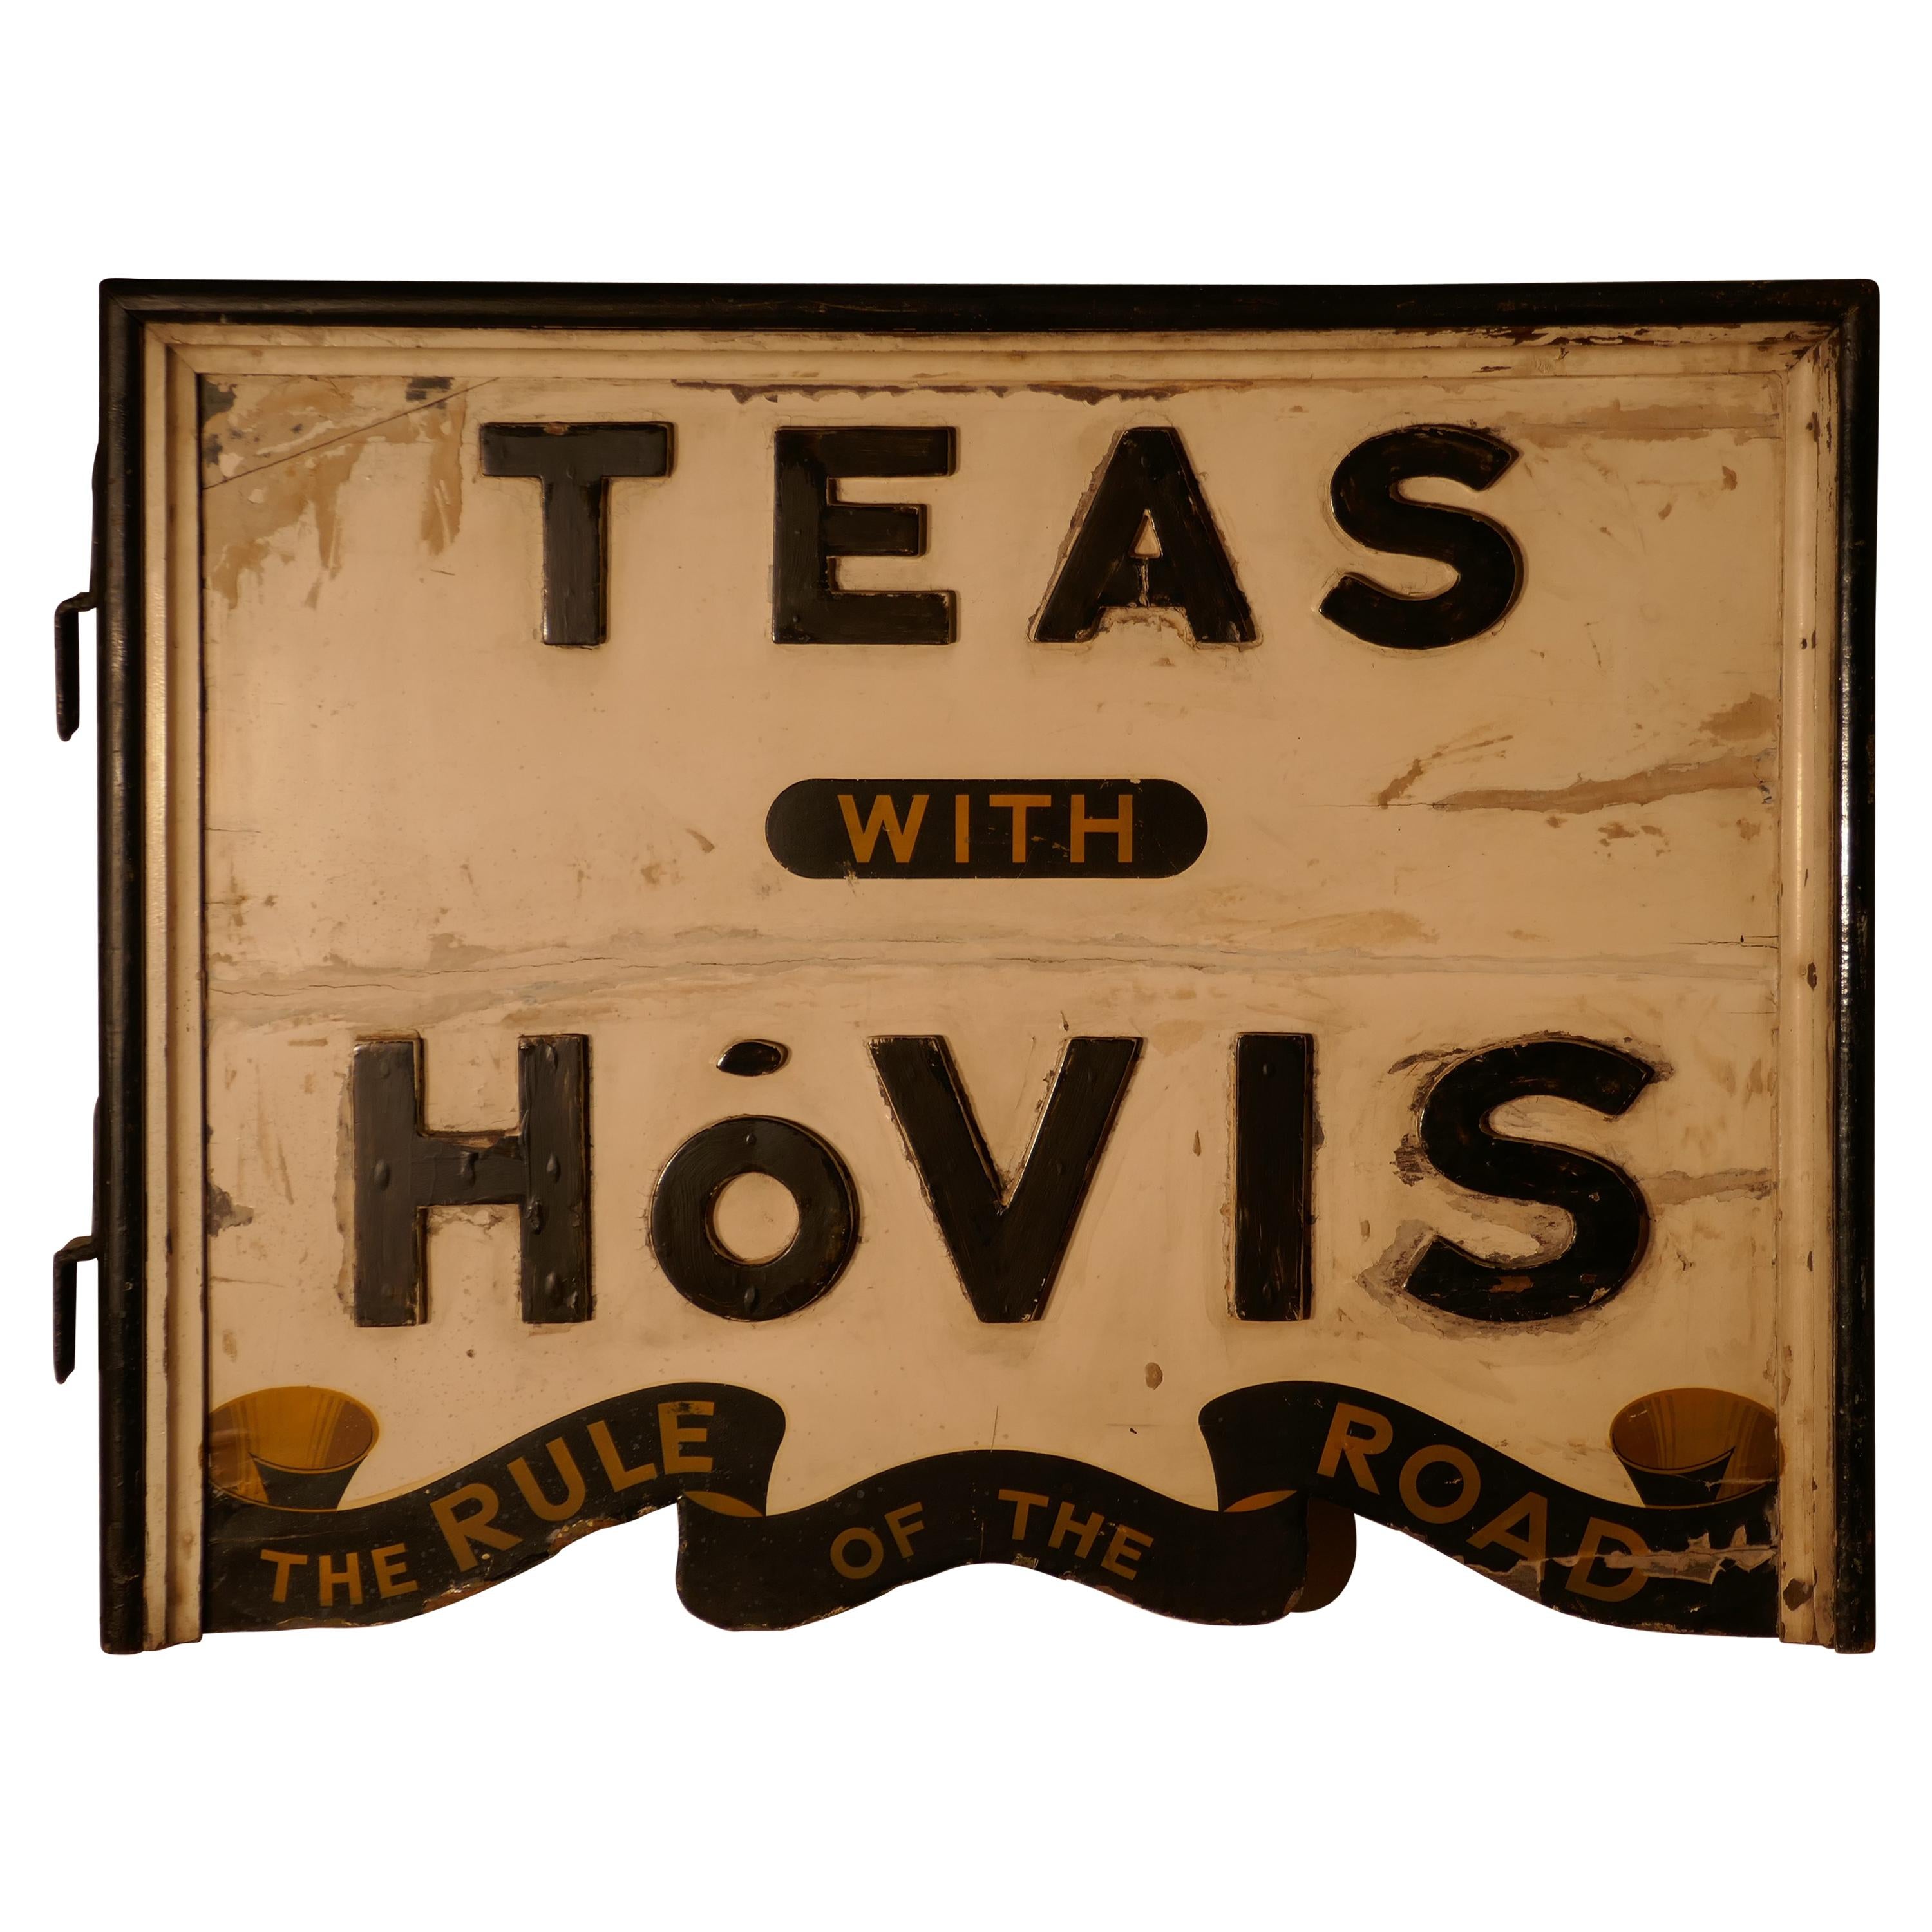 Three Dimensional Double-Sided Wooden Hovis Tea Shop Sign For Sale